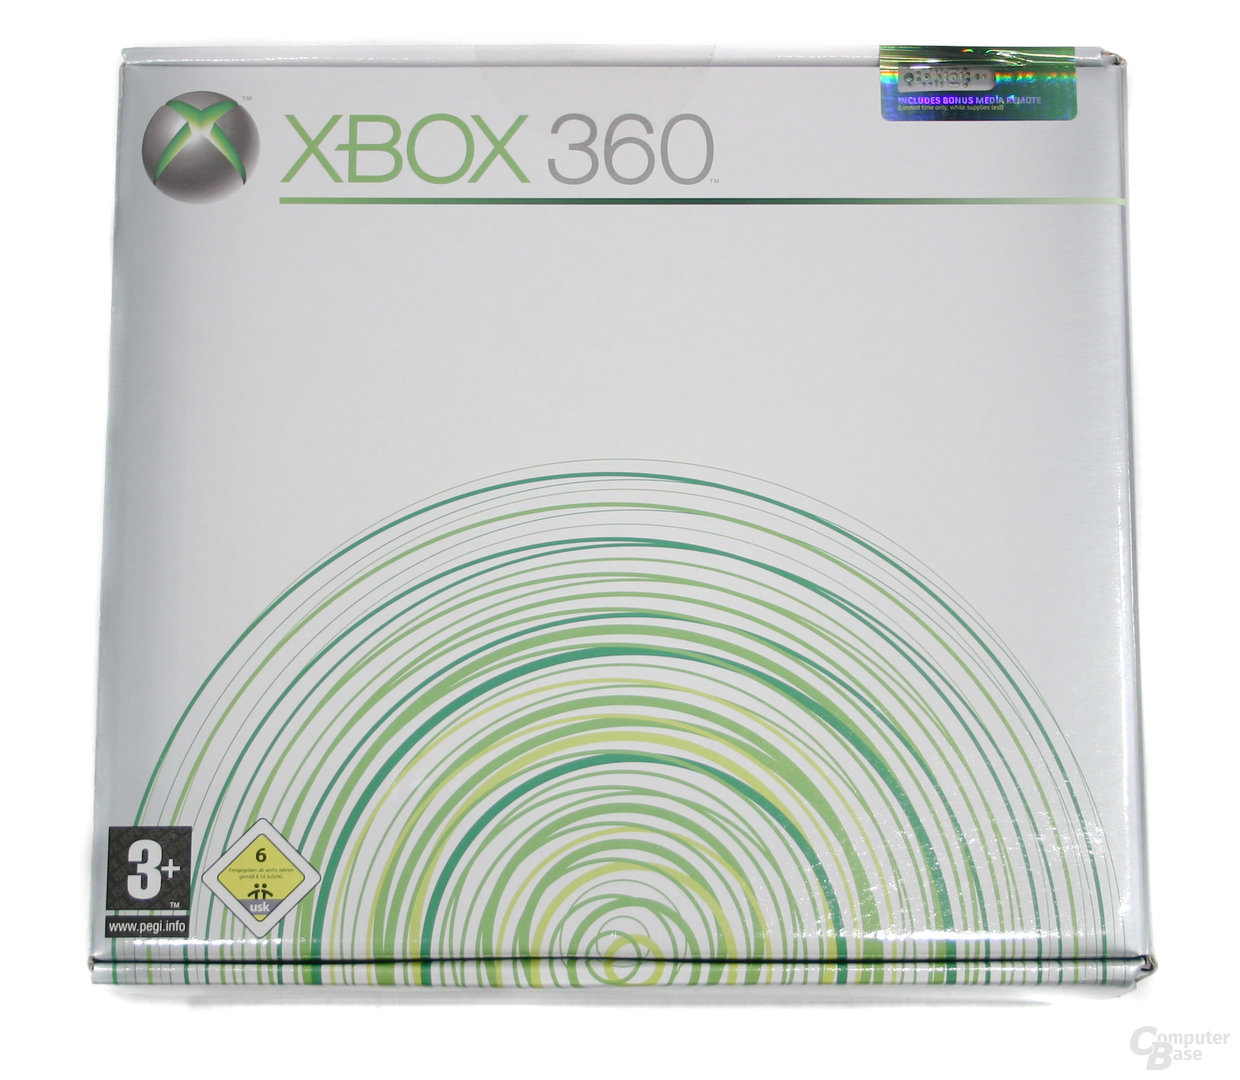 Xbox 360 - Verpackung des Pro Systems